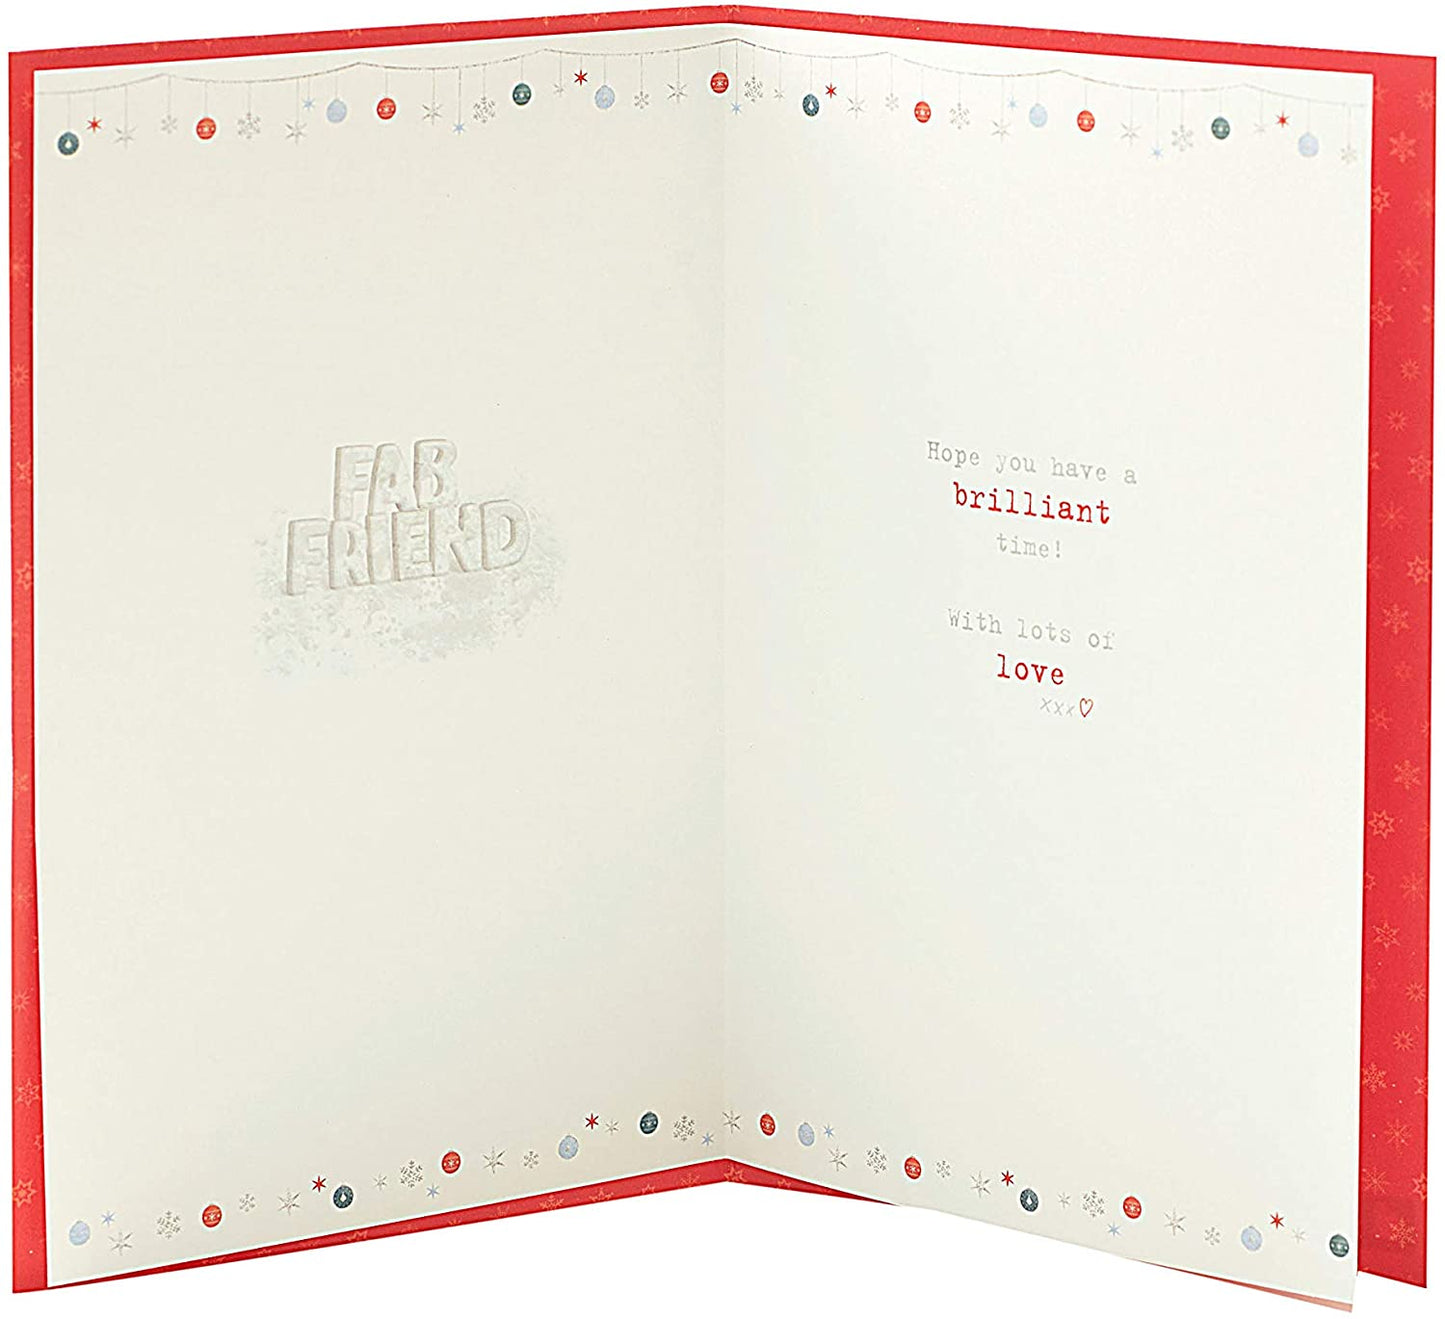 For A Great Friend Boofles Holding Fab Friend Letters Design Christmas Card